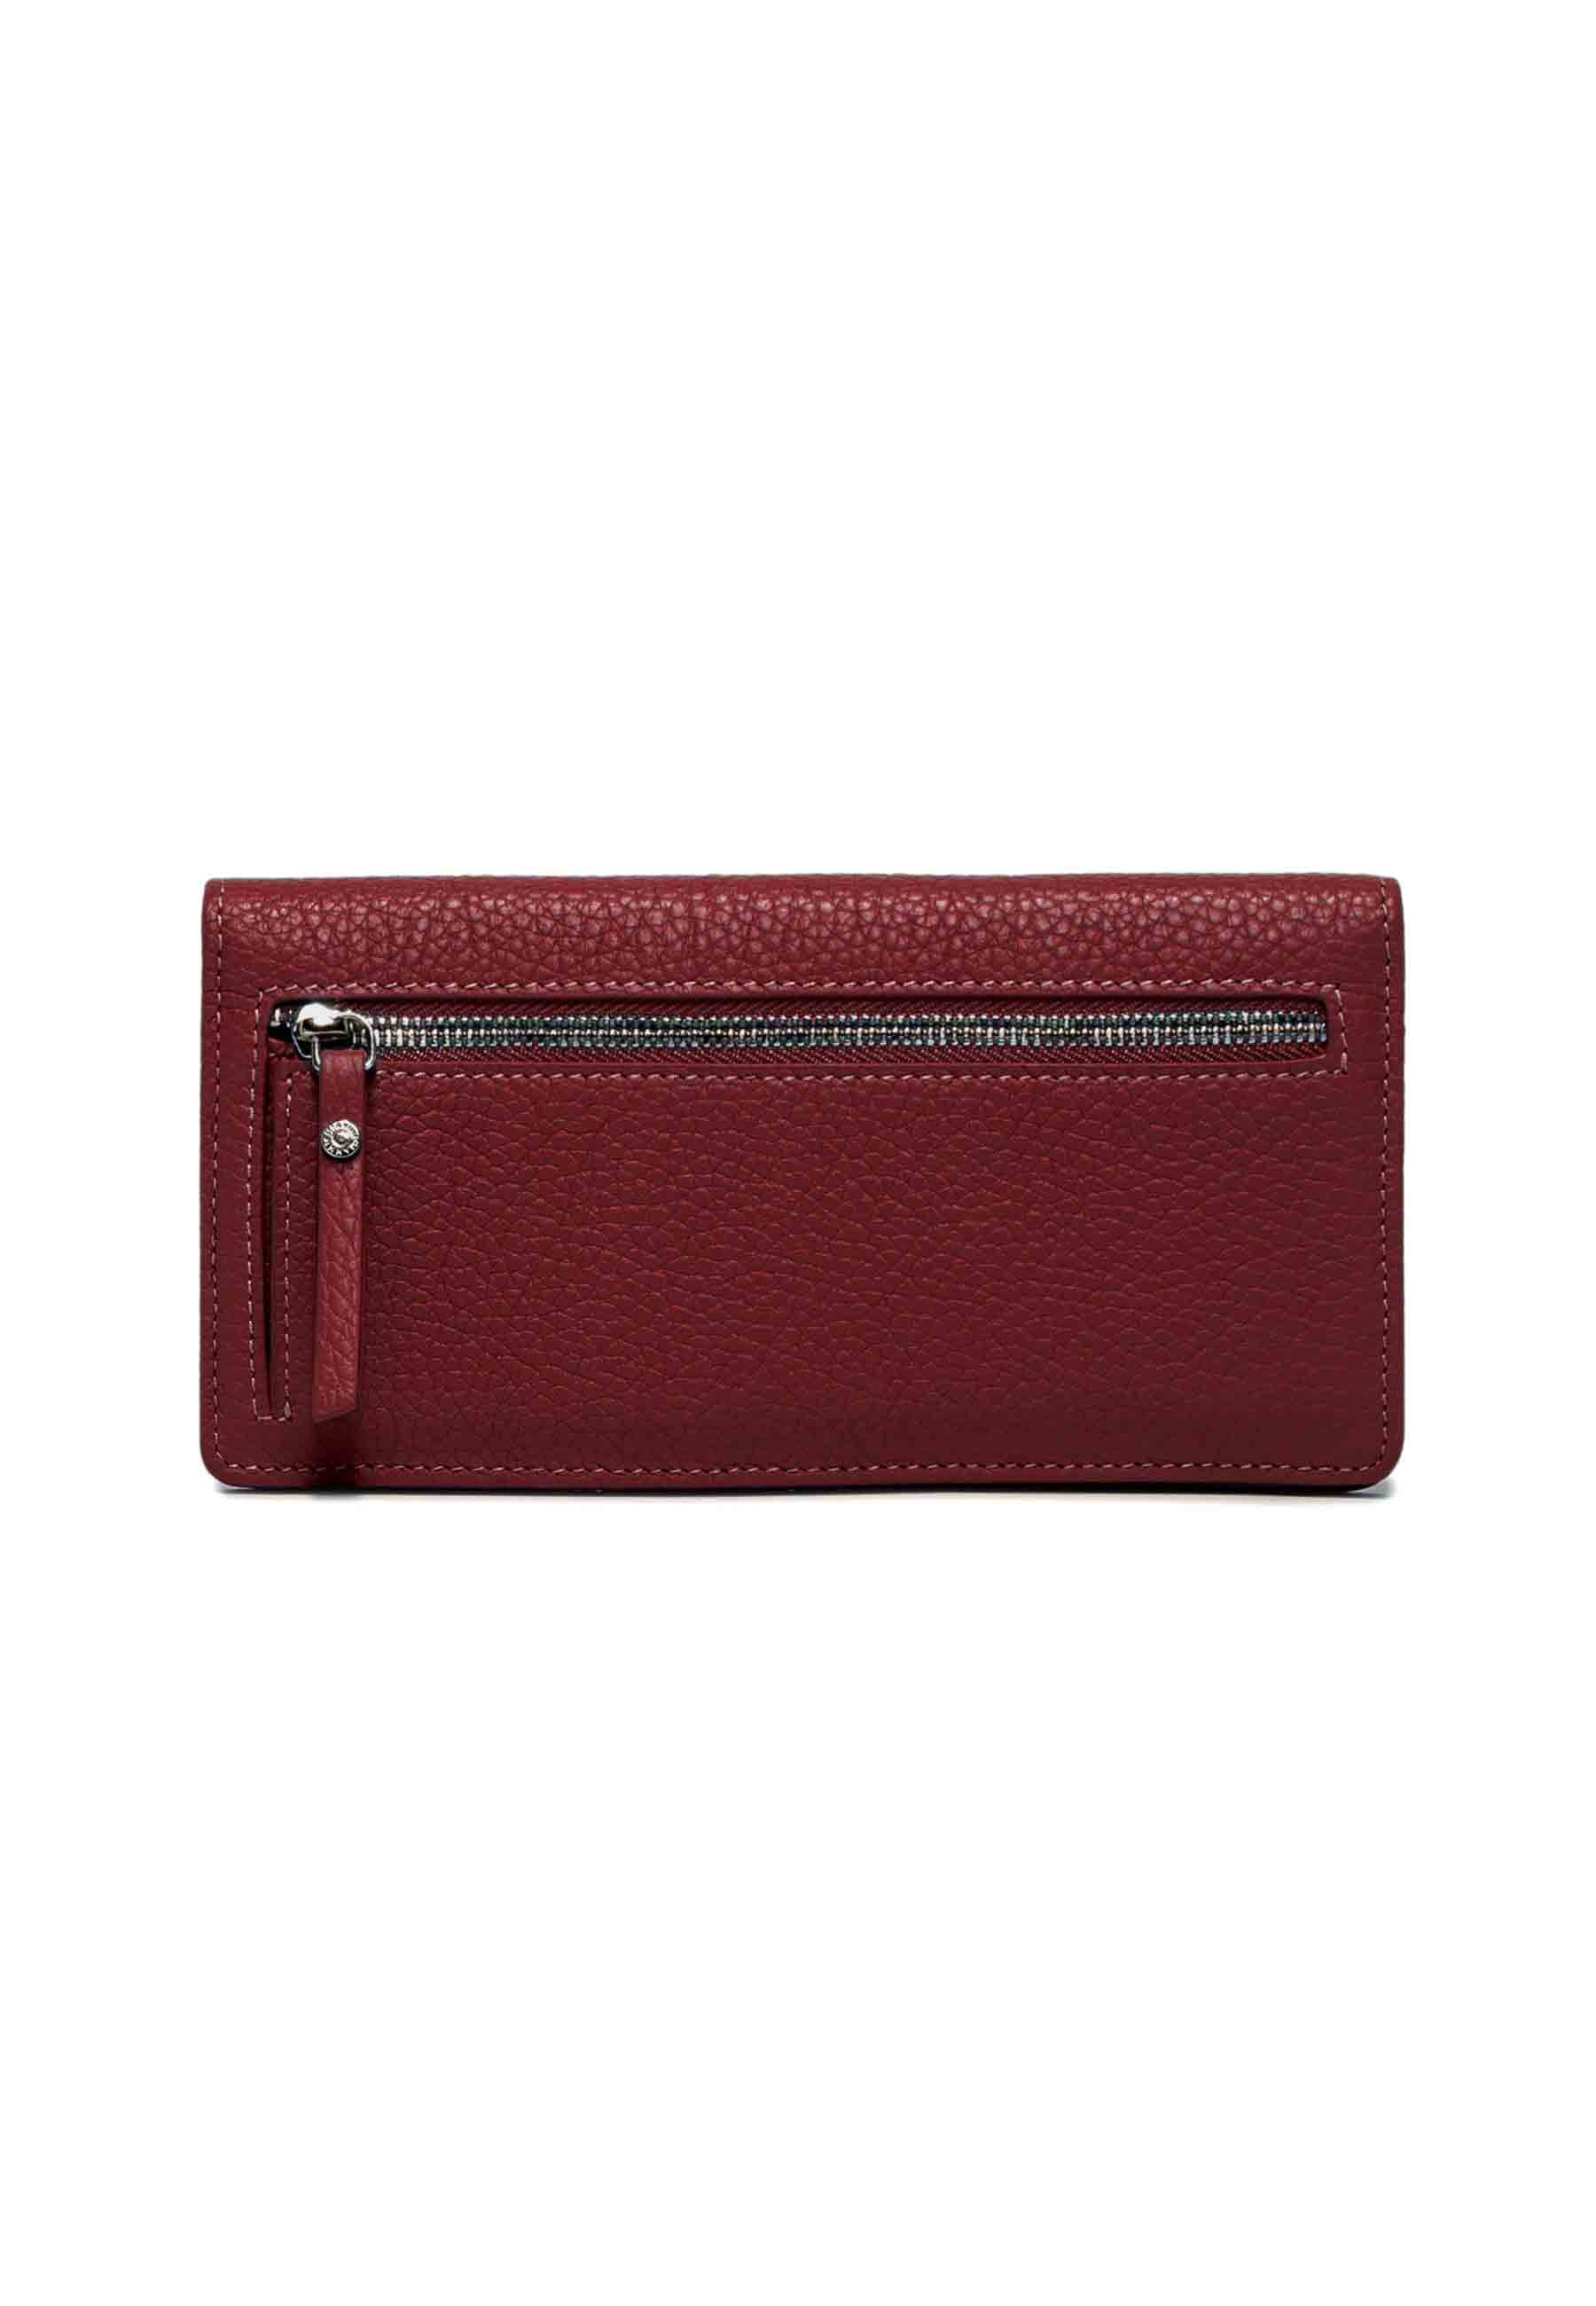 Women's wallet in burgundy hammered leather with closing button